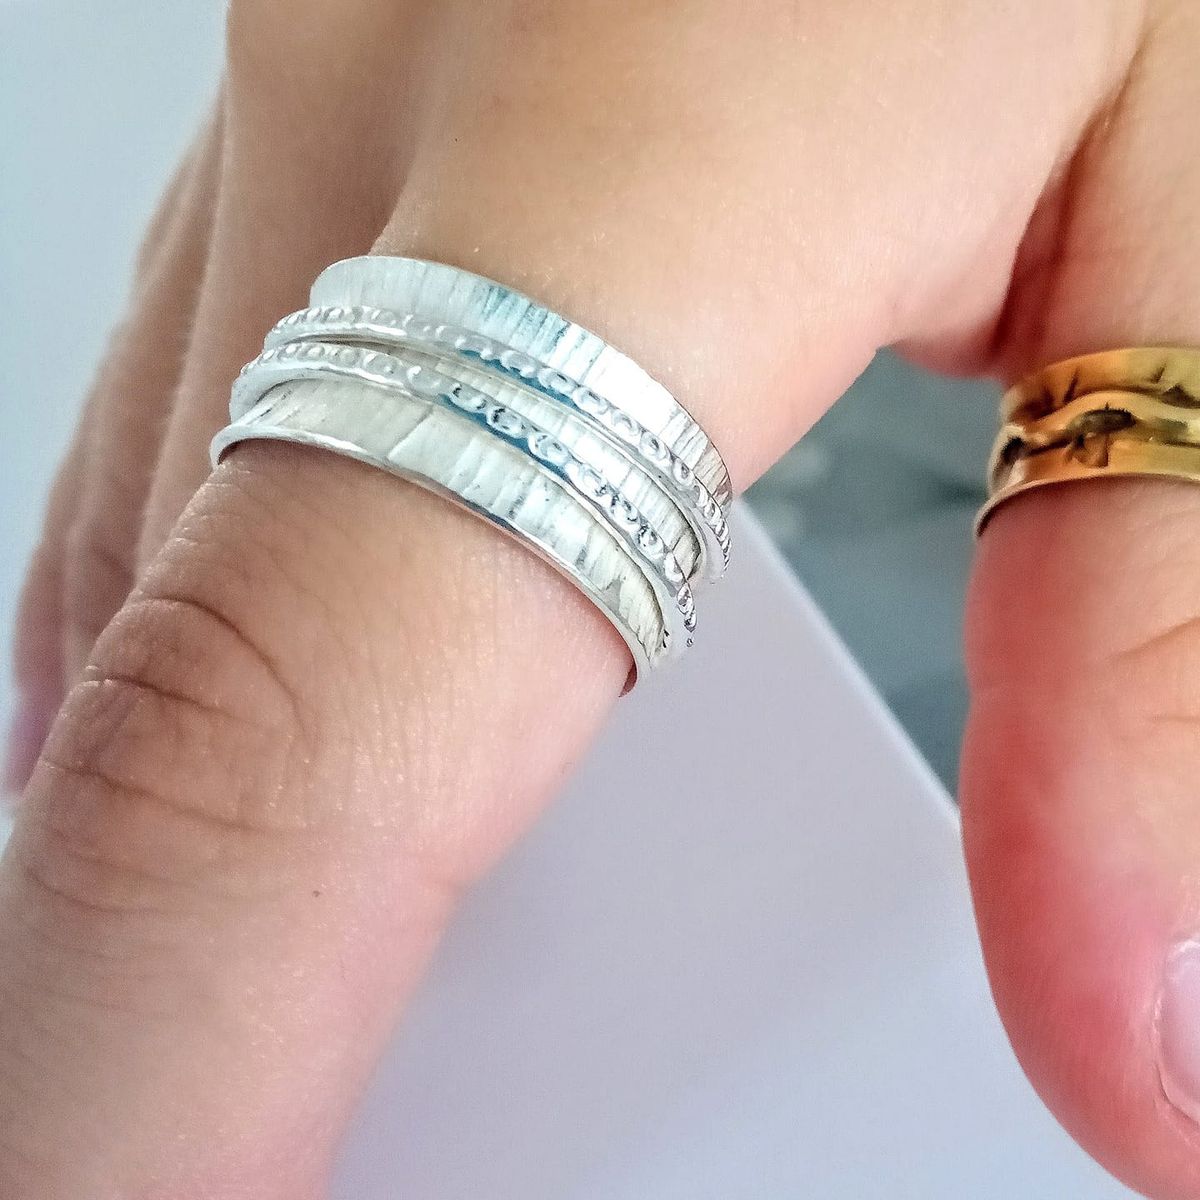 Sunday beginners silver ring making workshop 